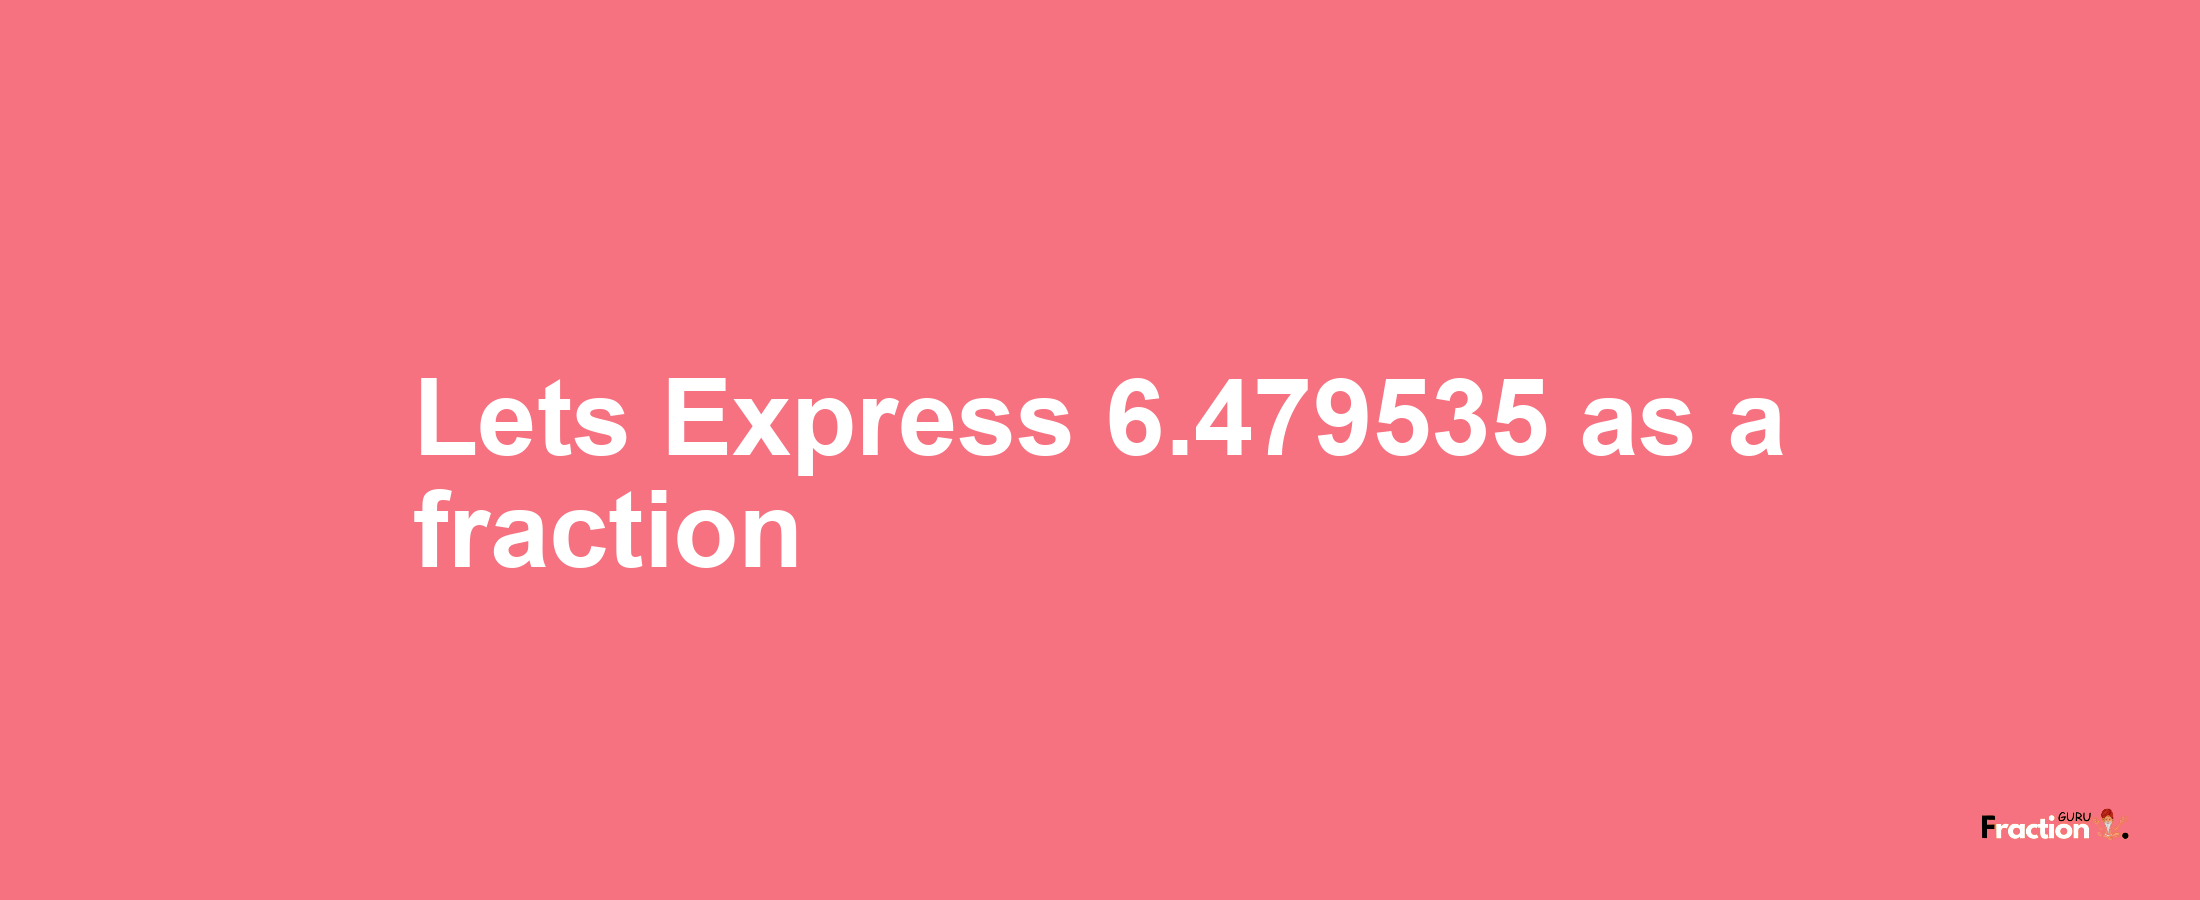 Lets Express 6.479535 as afraction